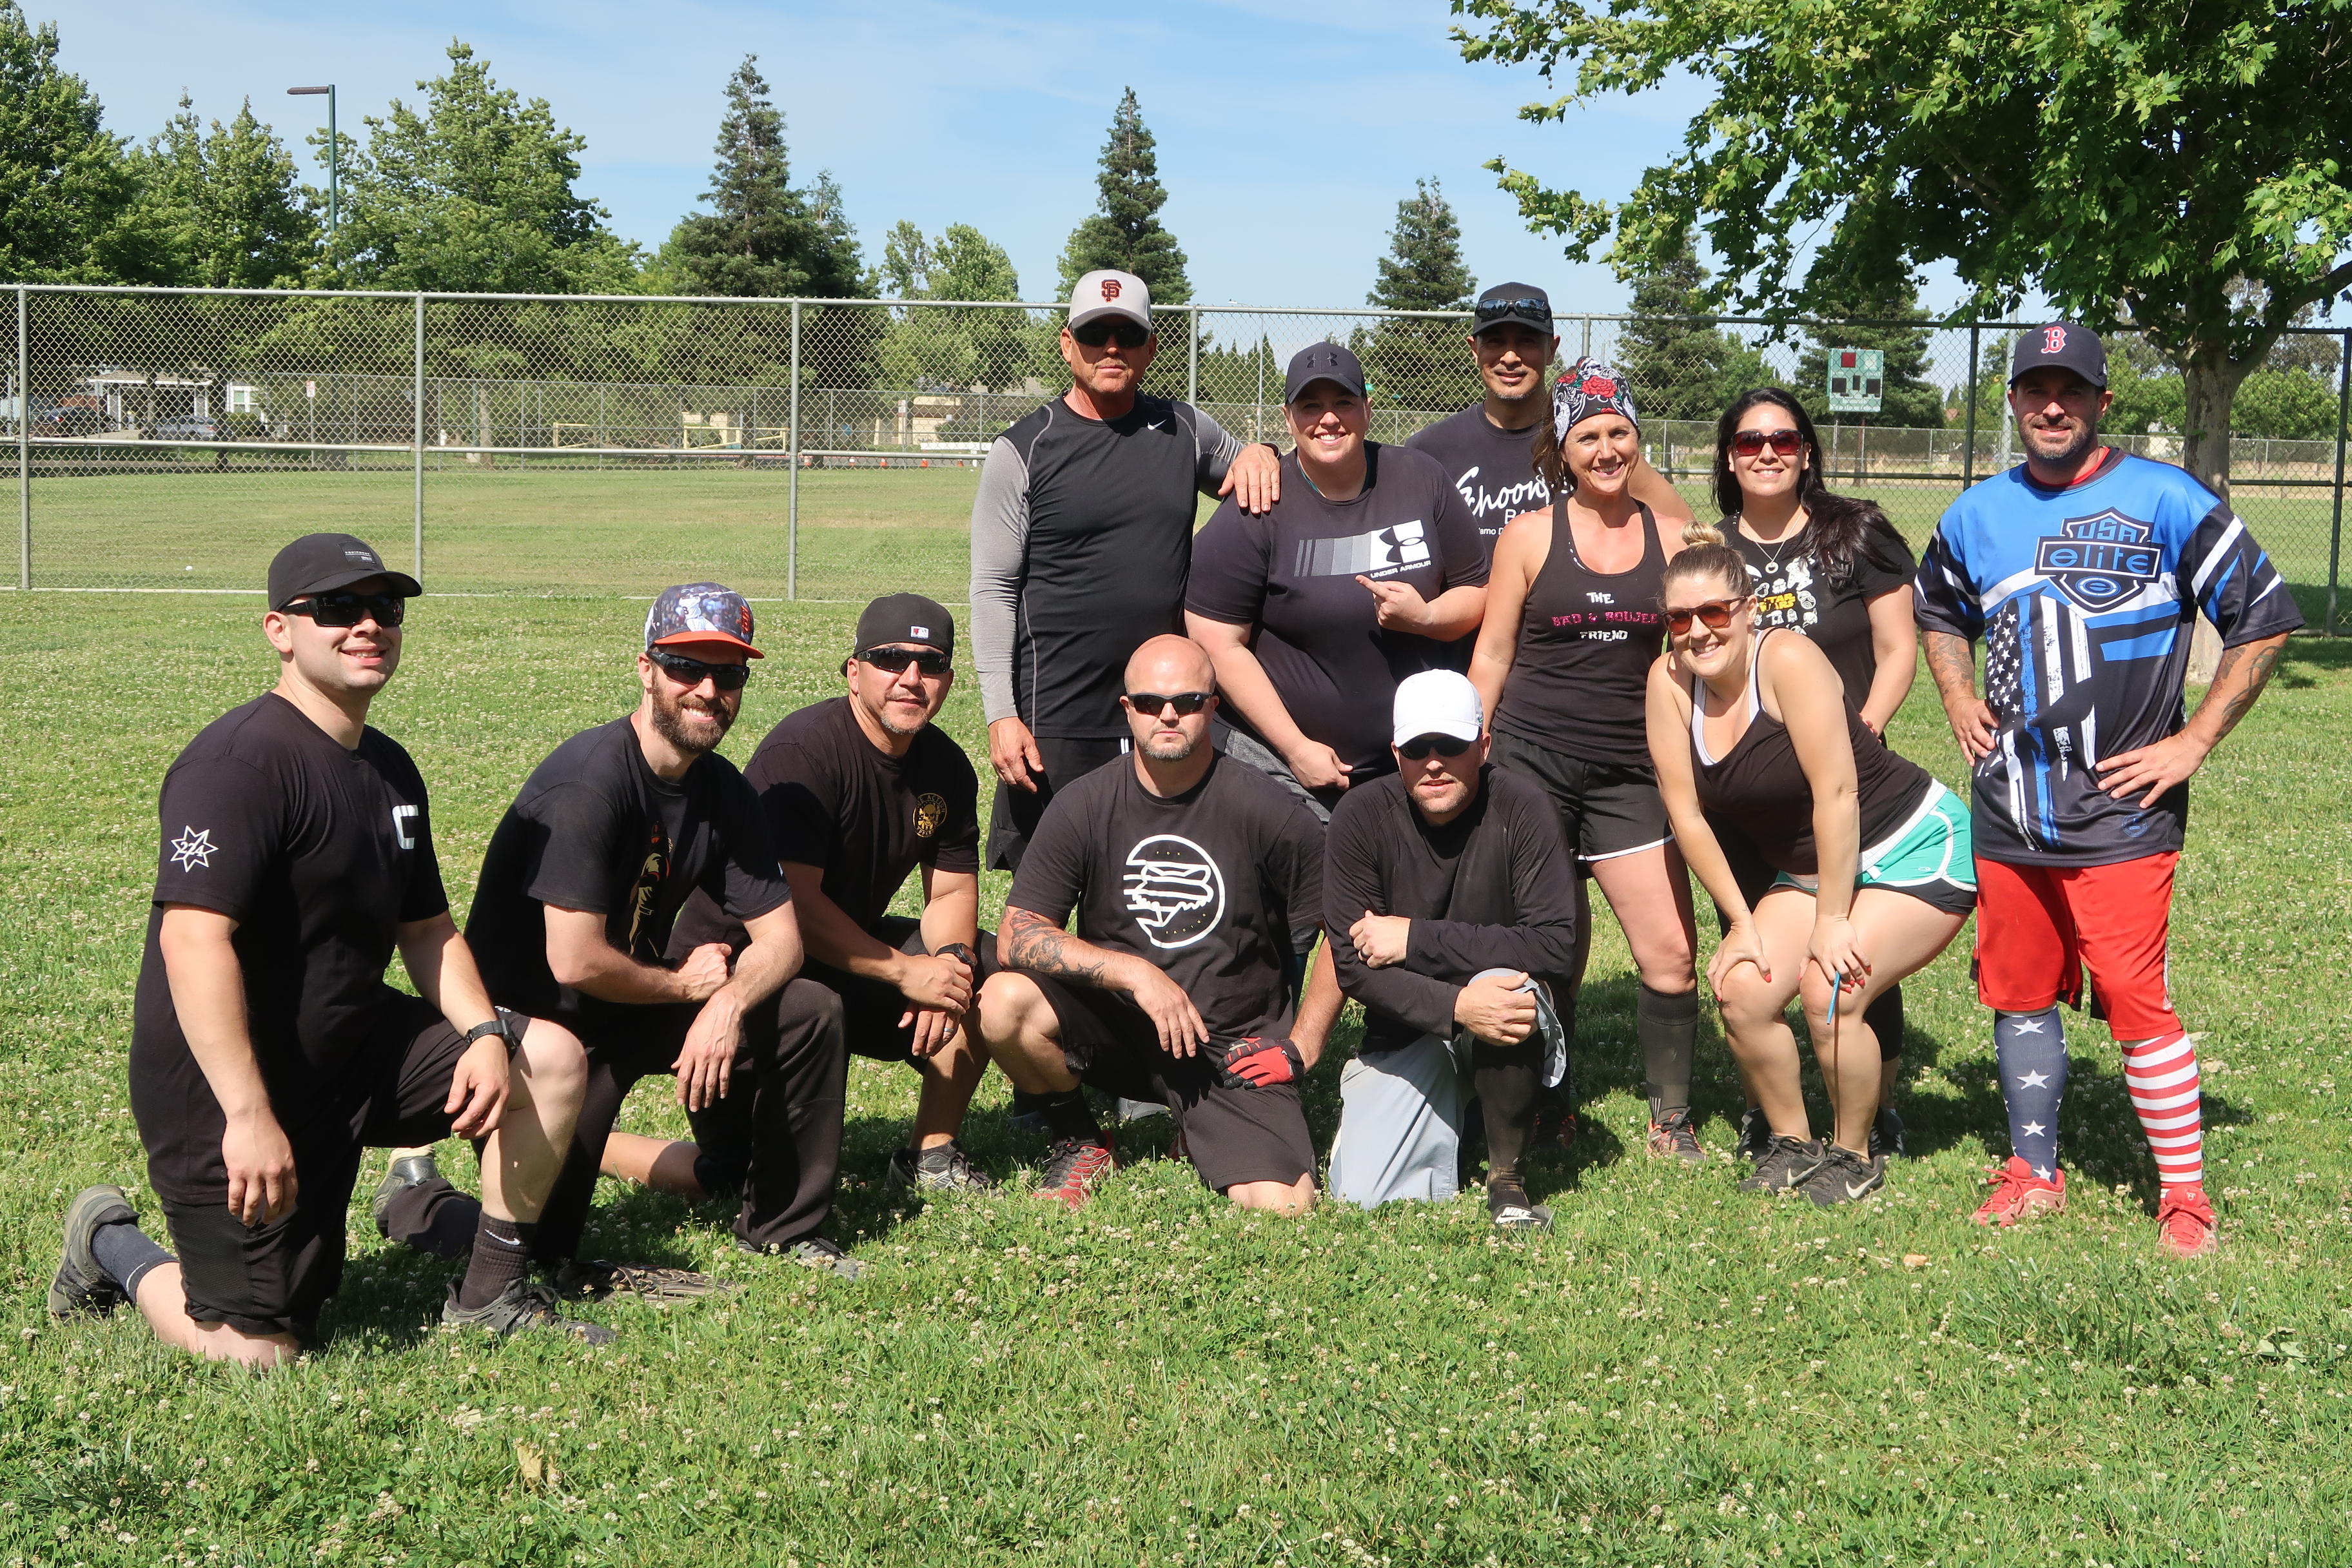 Men and women in softball uniforms pose on the grass.